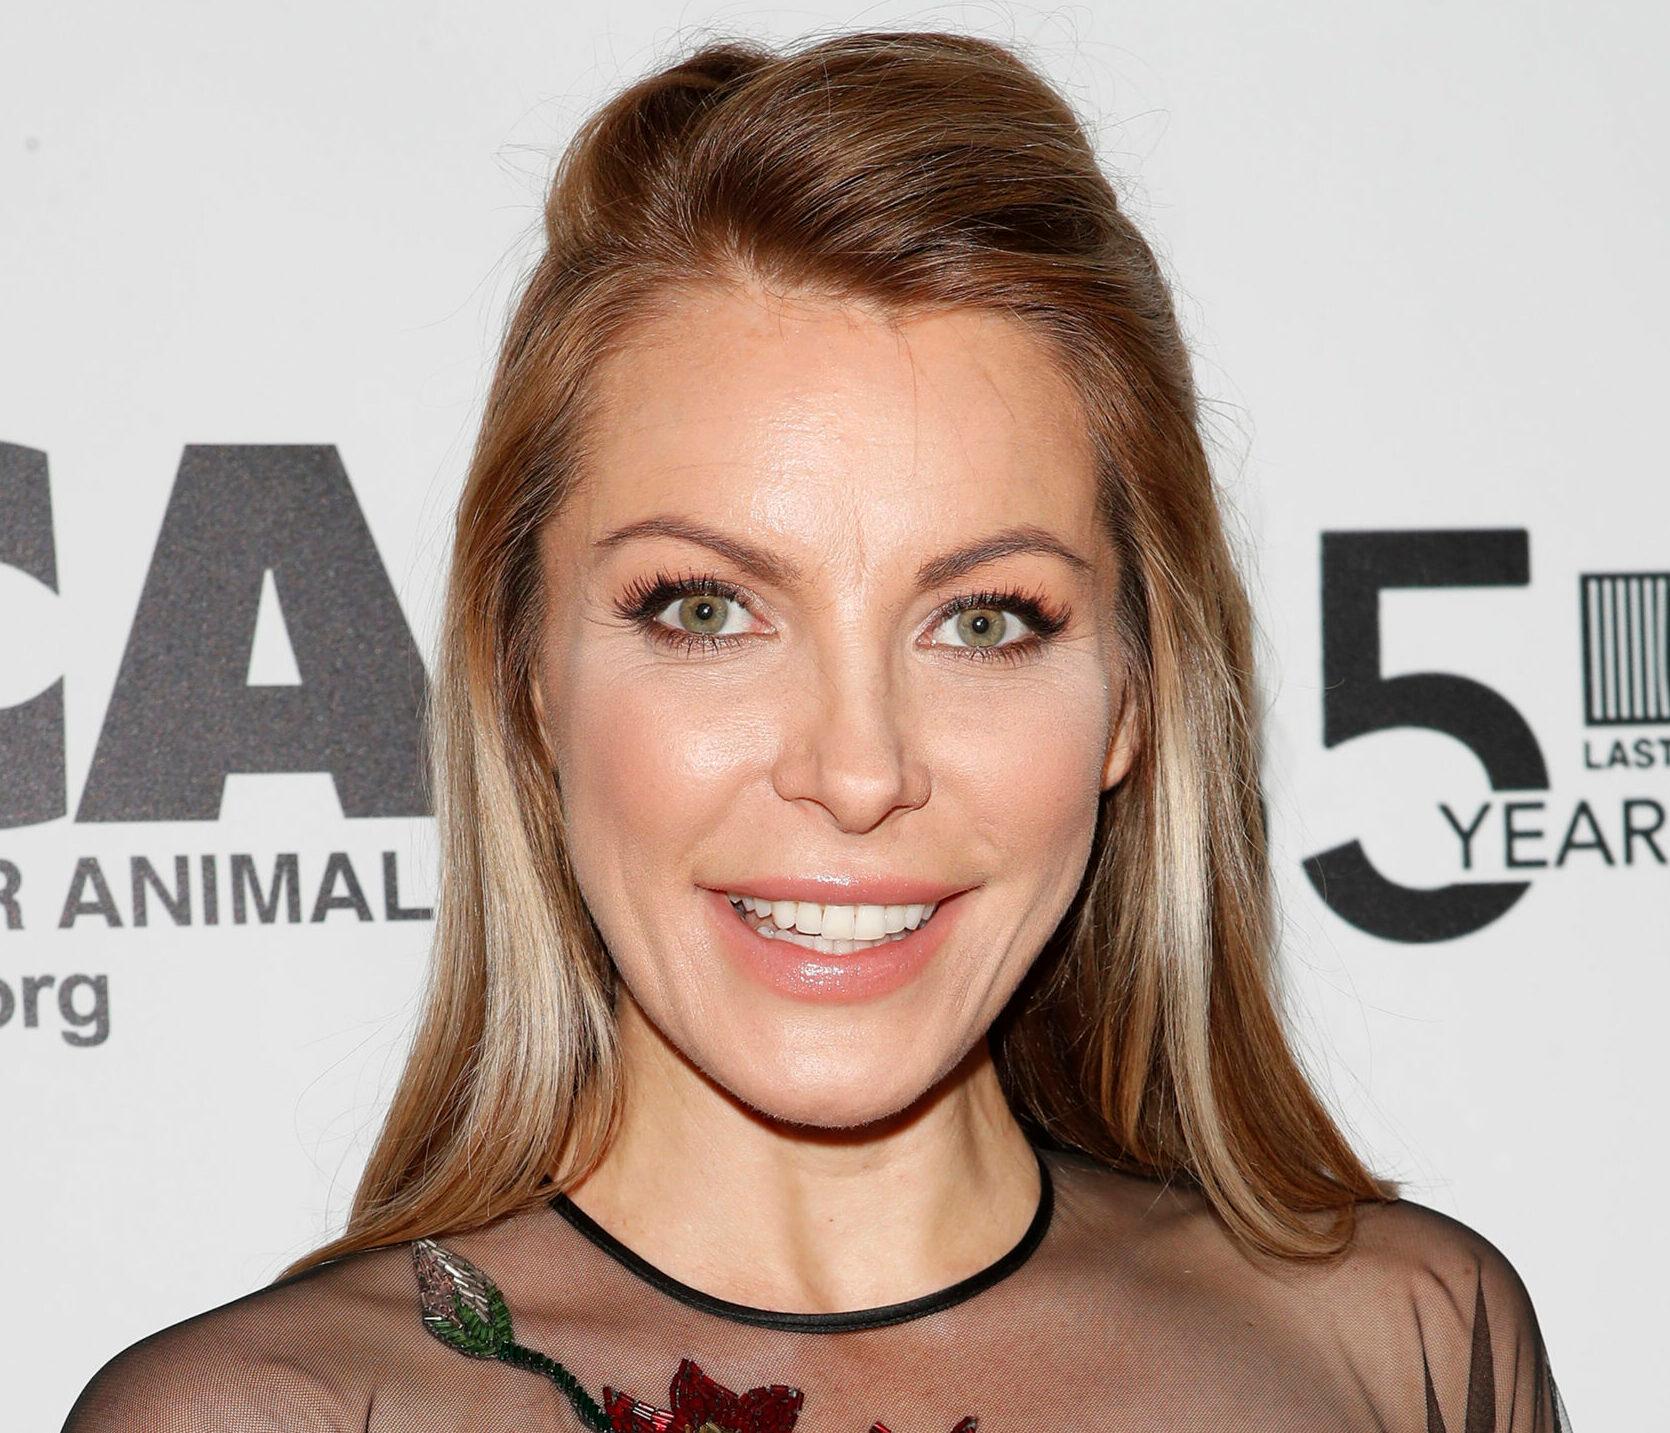 LOS ANGELES - OCT 19: Crystal Hefner at the Last Chance for Animals? 35th Anniversary Gala